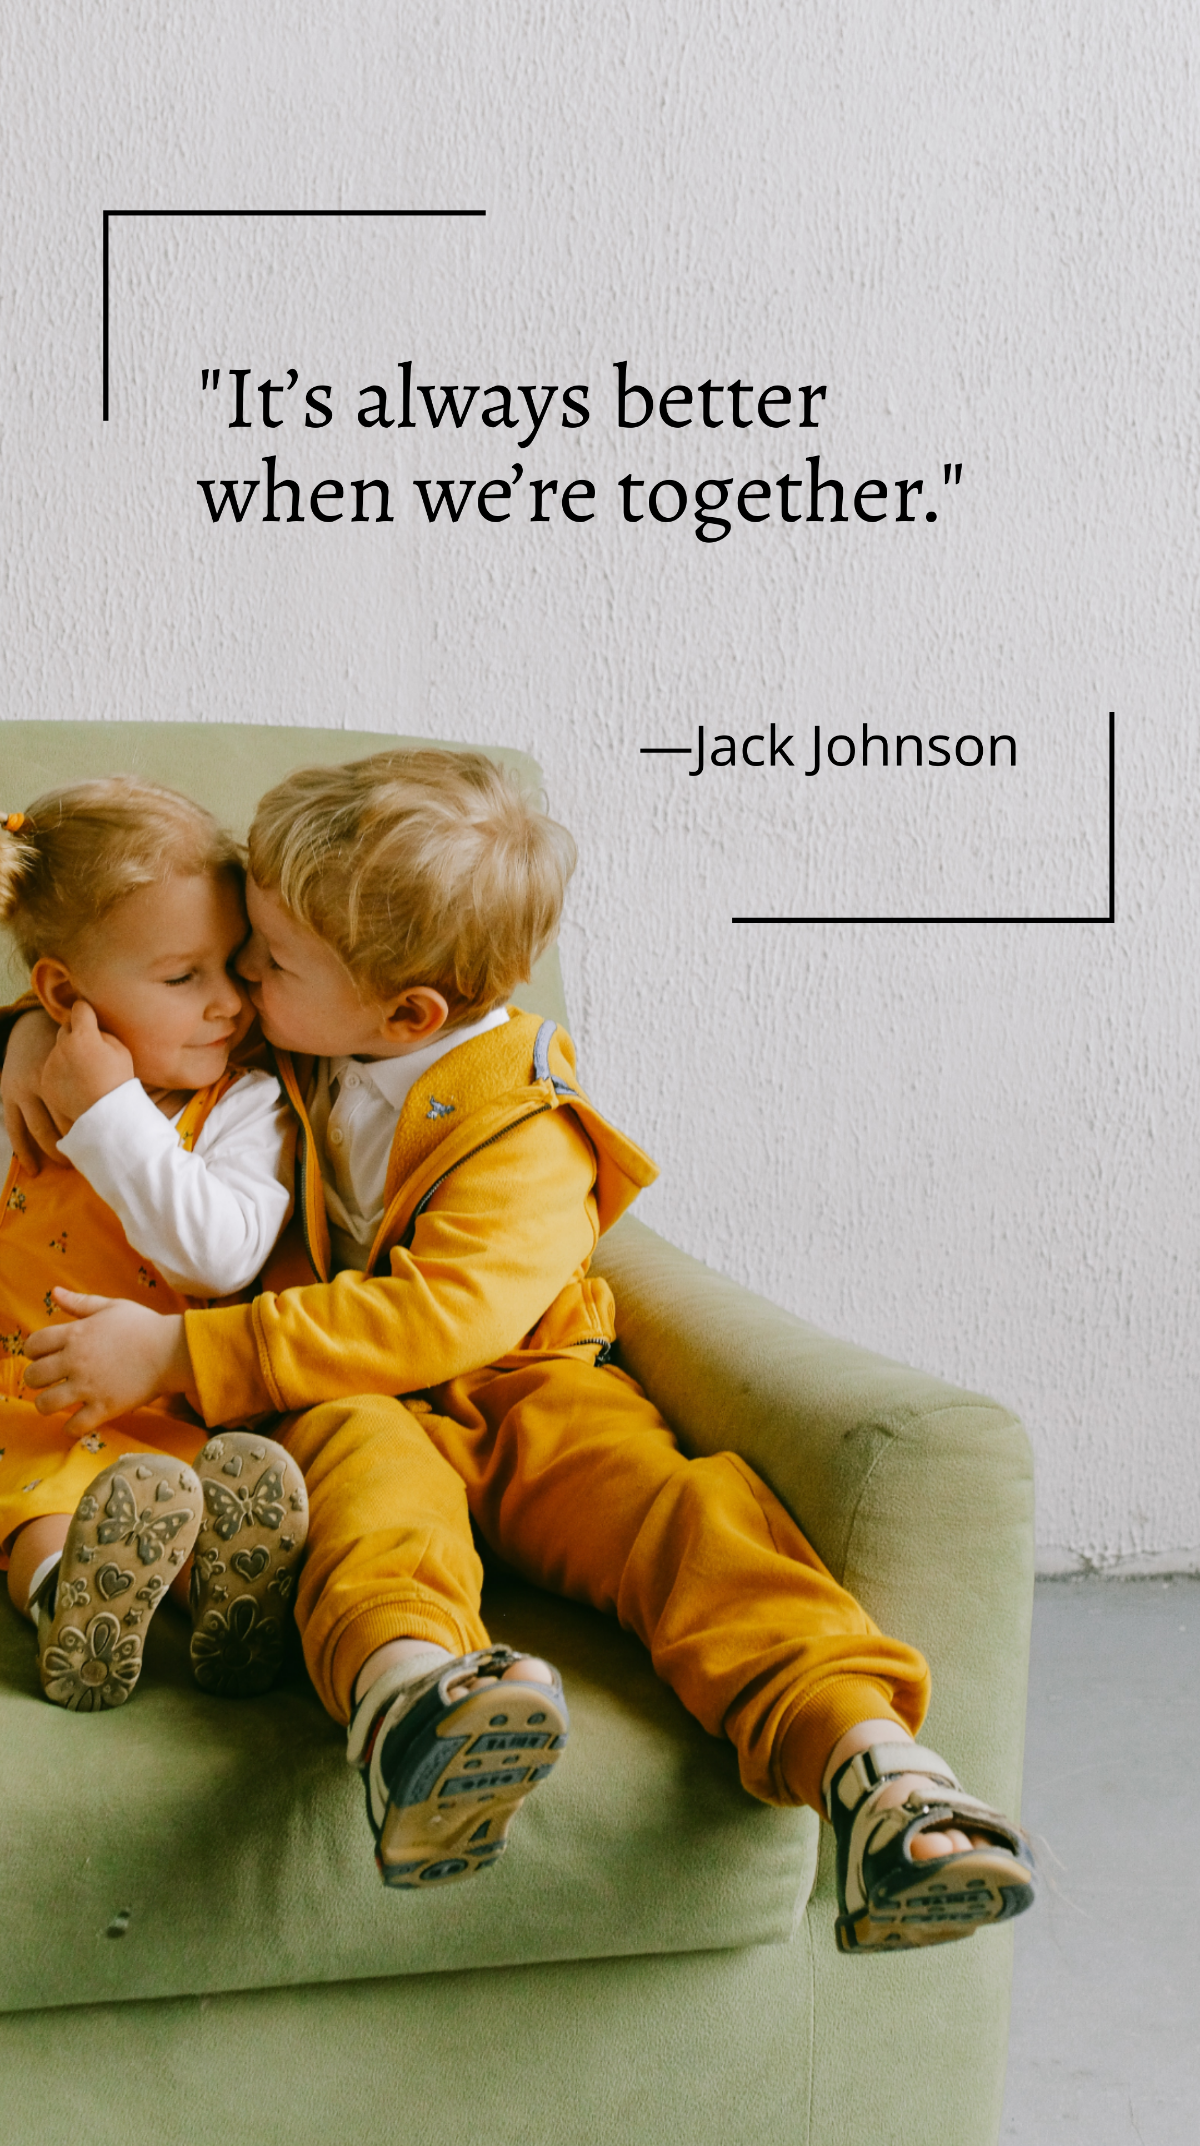 Jack Johnson - “It’s always better when we’re together.” Template